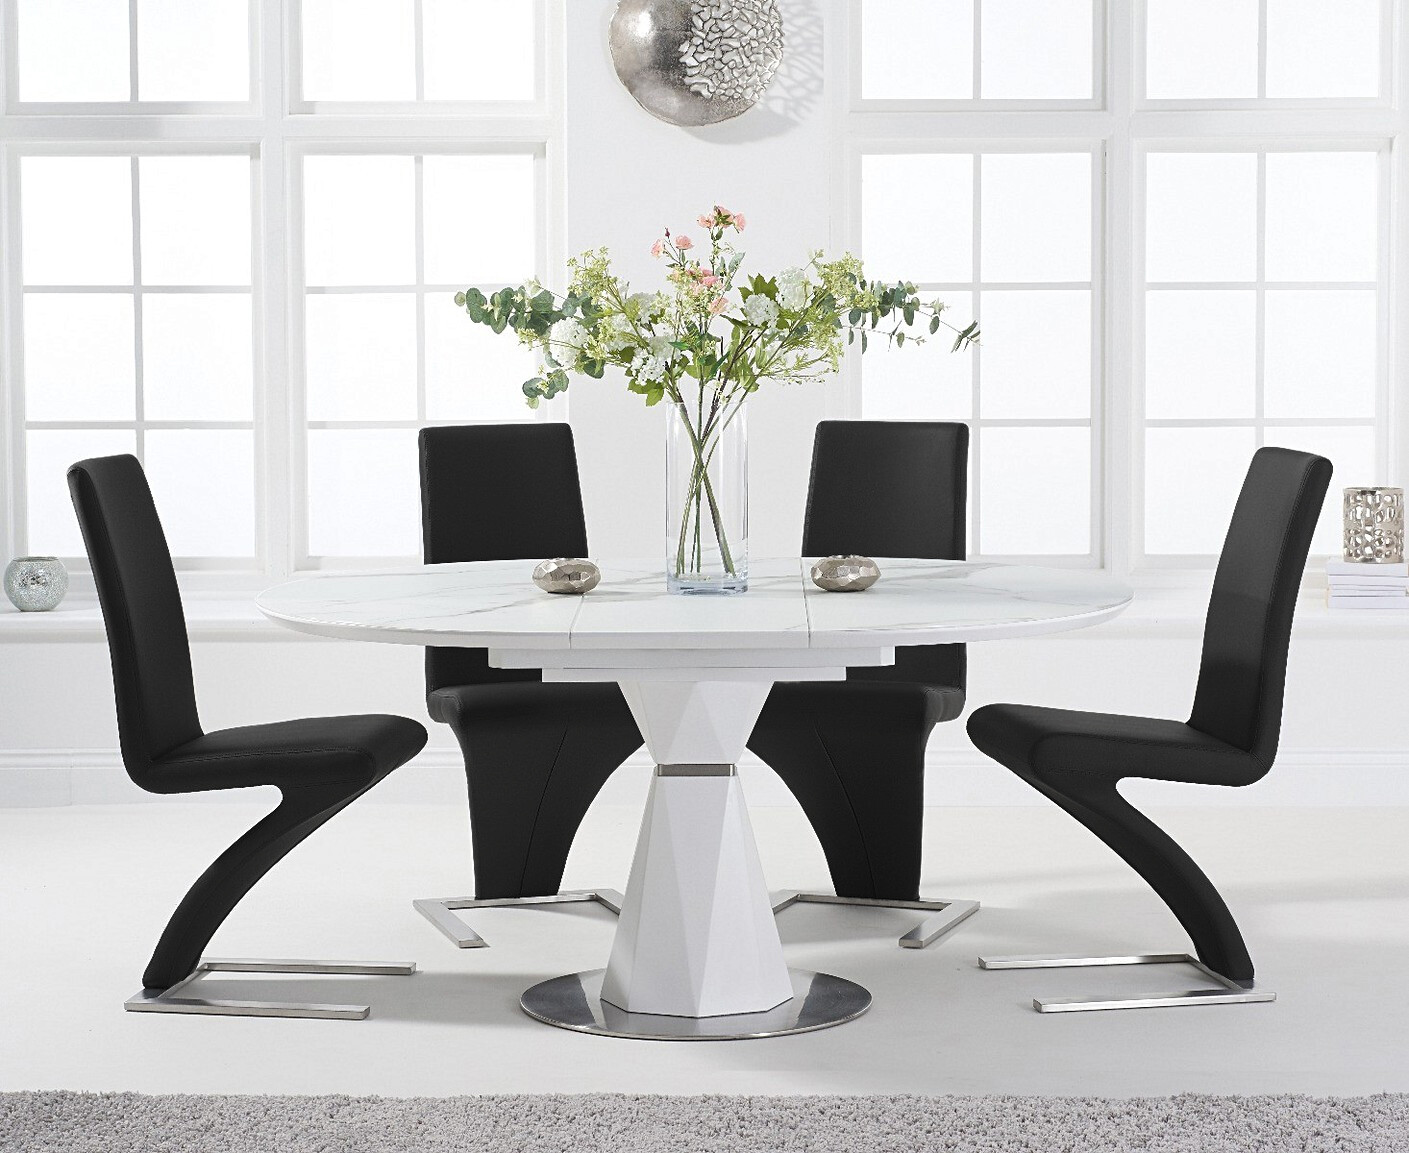 Photo 3 of Venosa 120cm round white dining table with 6 grey aldo chairs